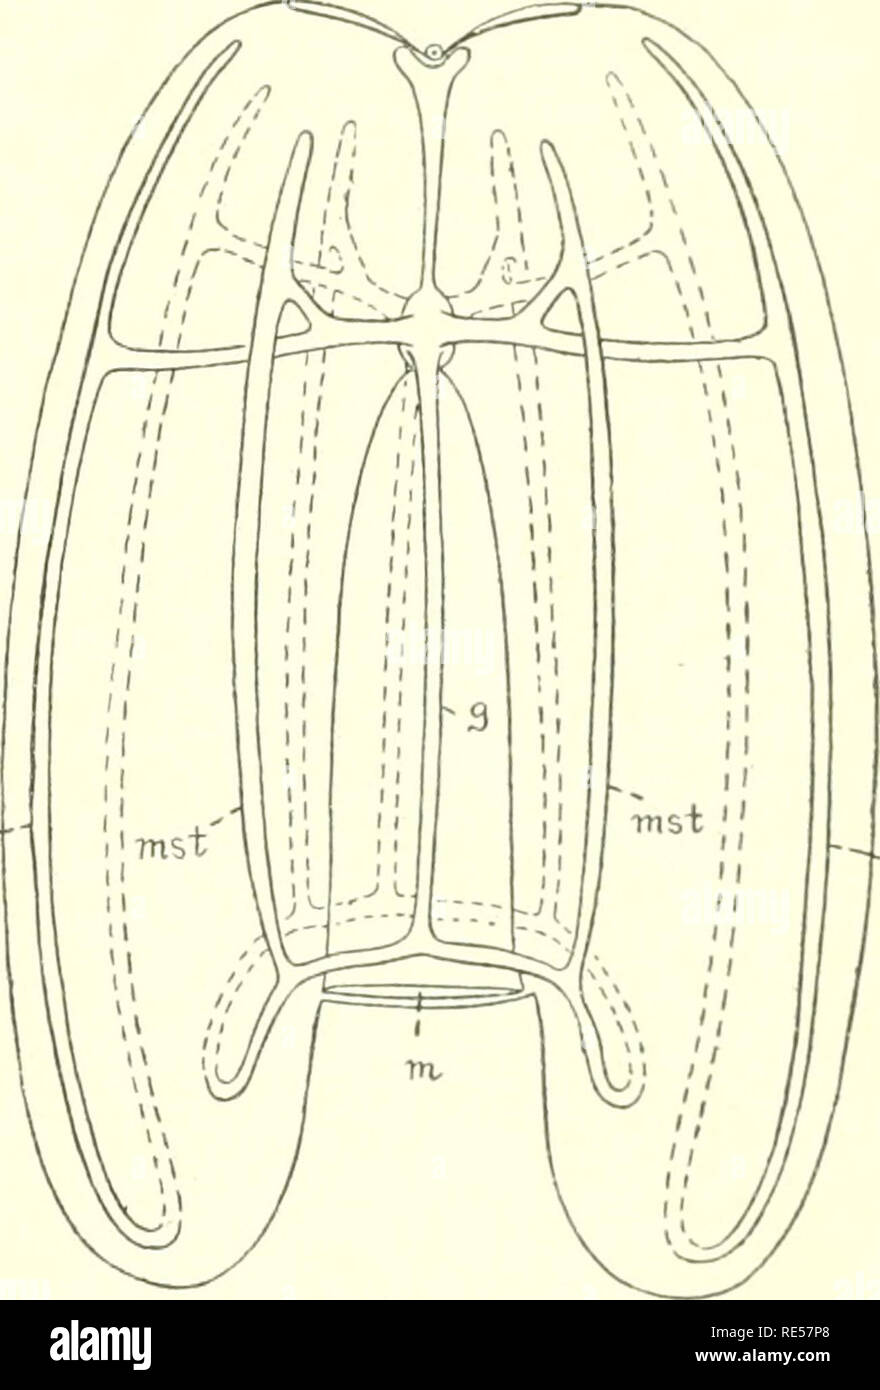 . Ctenophores of the Atlantic coast of North America. Ctenophora -- Atlantic Coast; Ctenophora. 1. 2. Fig. I.—Diagram illustrating characters of central part of gastro-vascular system of ctenophores. Fig. 2.—Diagram showing character of canal-circuits in LobatcB. Tentacles, tentacular canals, ciliary combs, and auricles are omitted. In addition to the two tentacular vessels and the axial fimnel-tube, the fvmnel gives rise to four interradial vessels, which arise typically at an angle of 45° with the stomodaeal and funnel axes. In the Cydippidae, however, the four interradial vessels do not ari Stock Photo